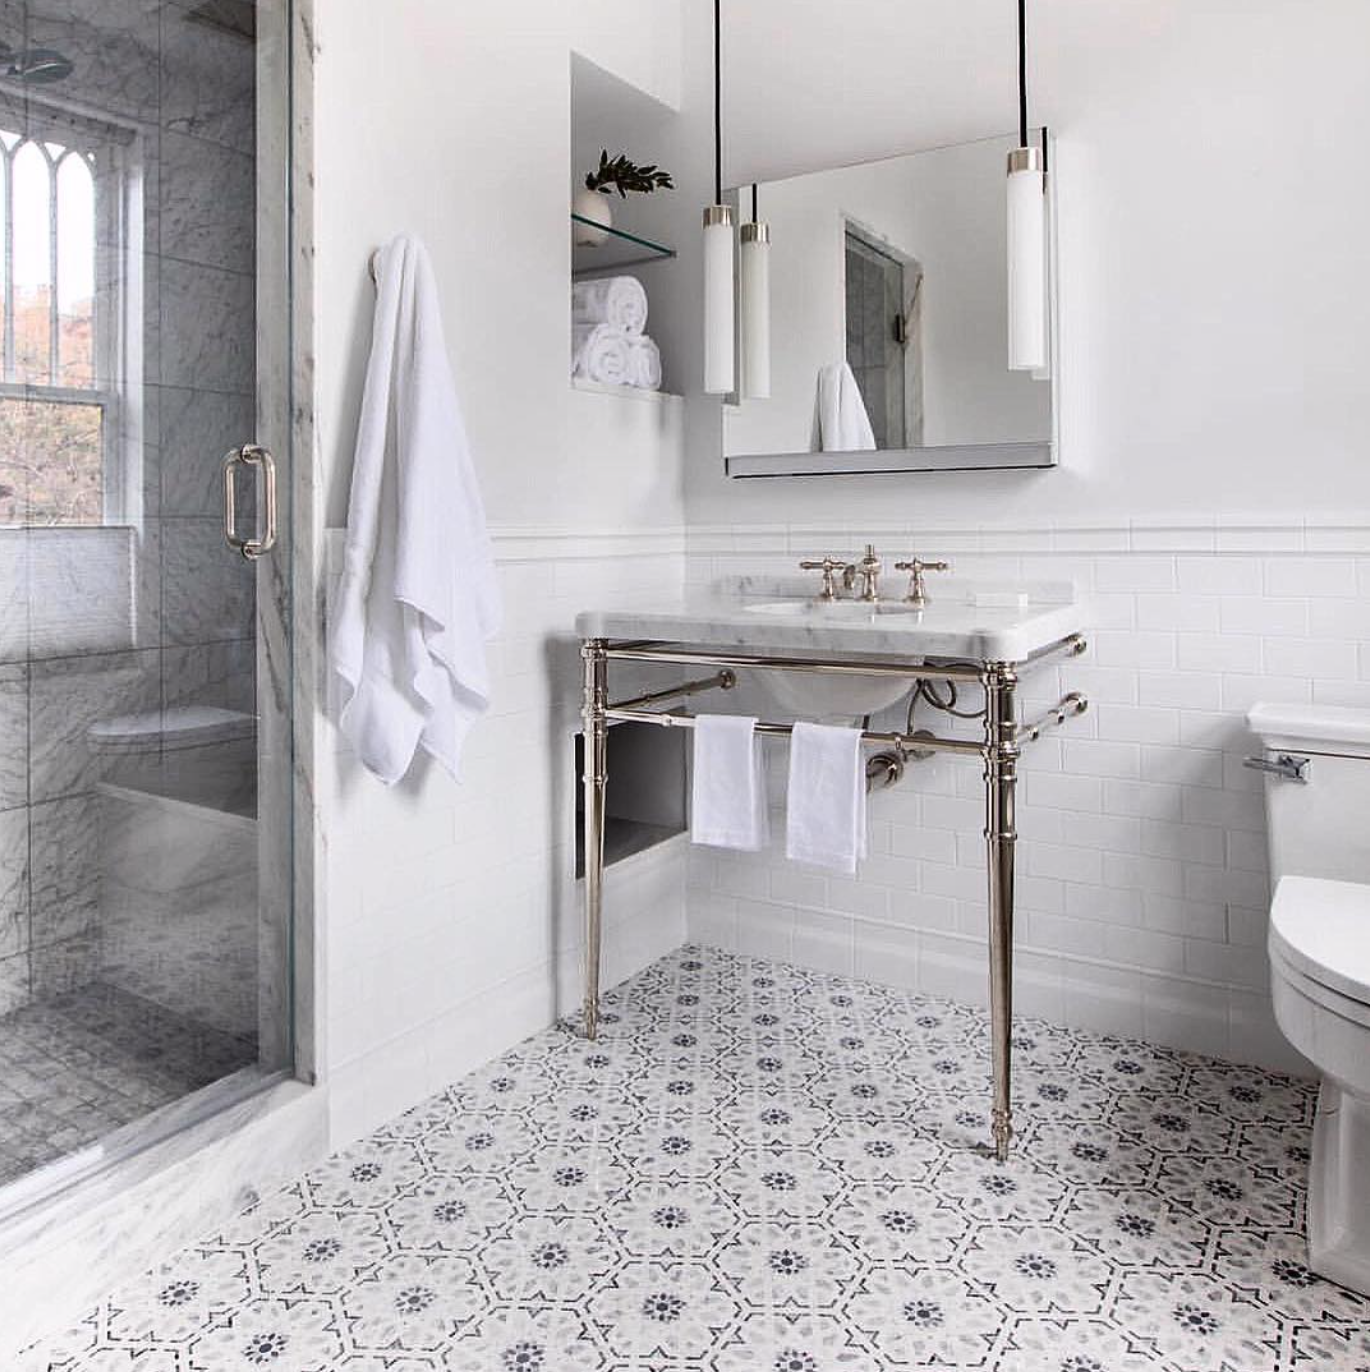  Traditional meets modern in this classic bath by  @reid_havenbuilders . The Uplift lighting and cabinetry is paired with the Inigo collection by  @kallistaplumbing . 